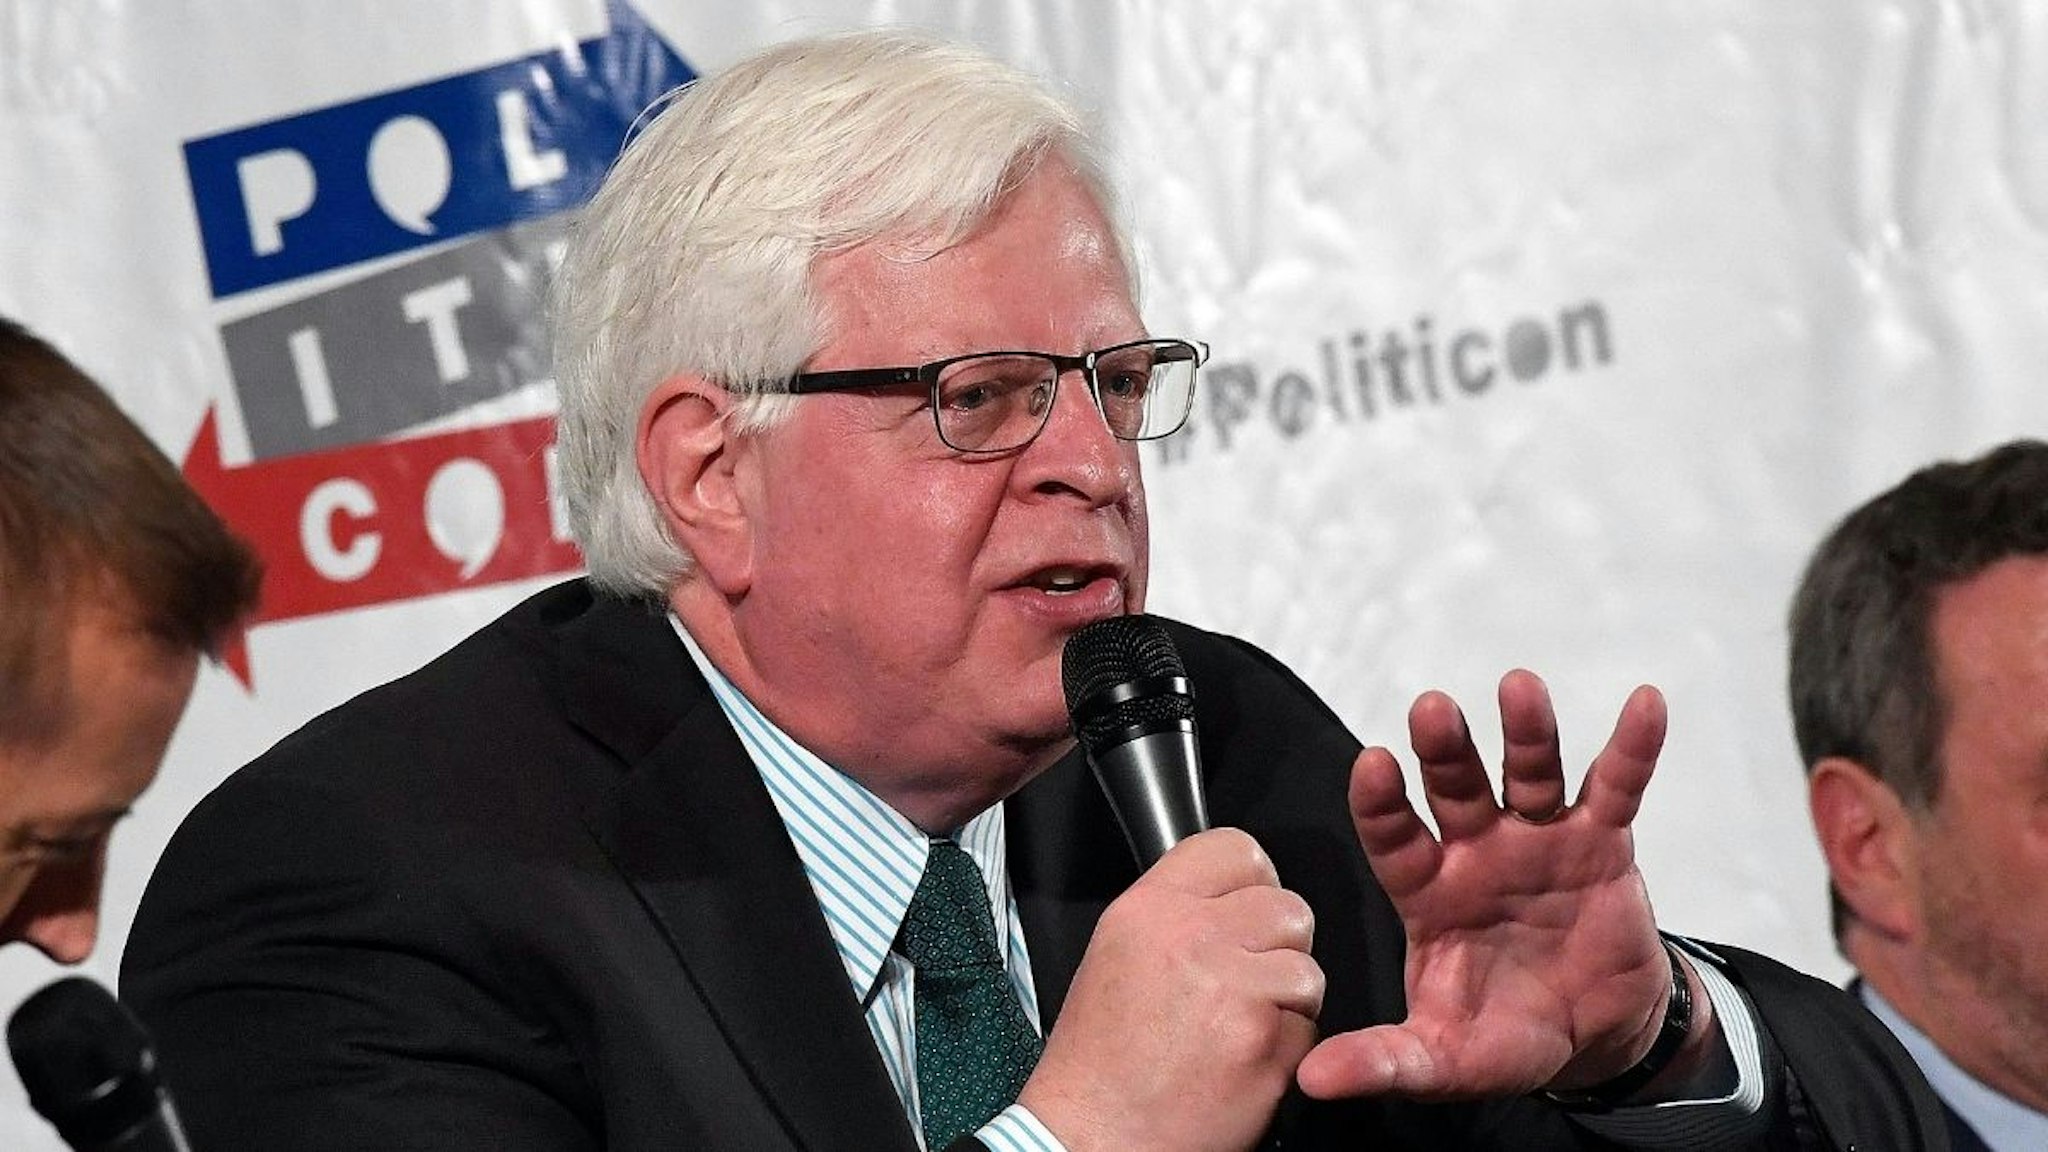 Dennis Prager speaks at the 'Now What, Republicans?' panel during Politicon at Pasadena Convention Center on July 30, 2017 in Pasadena, California.